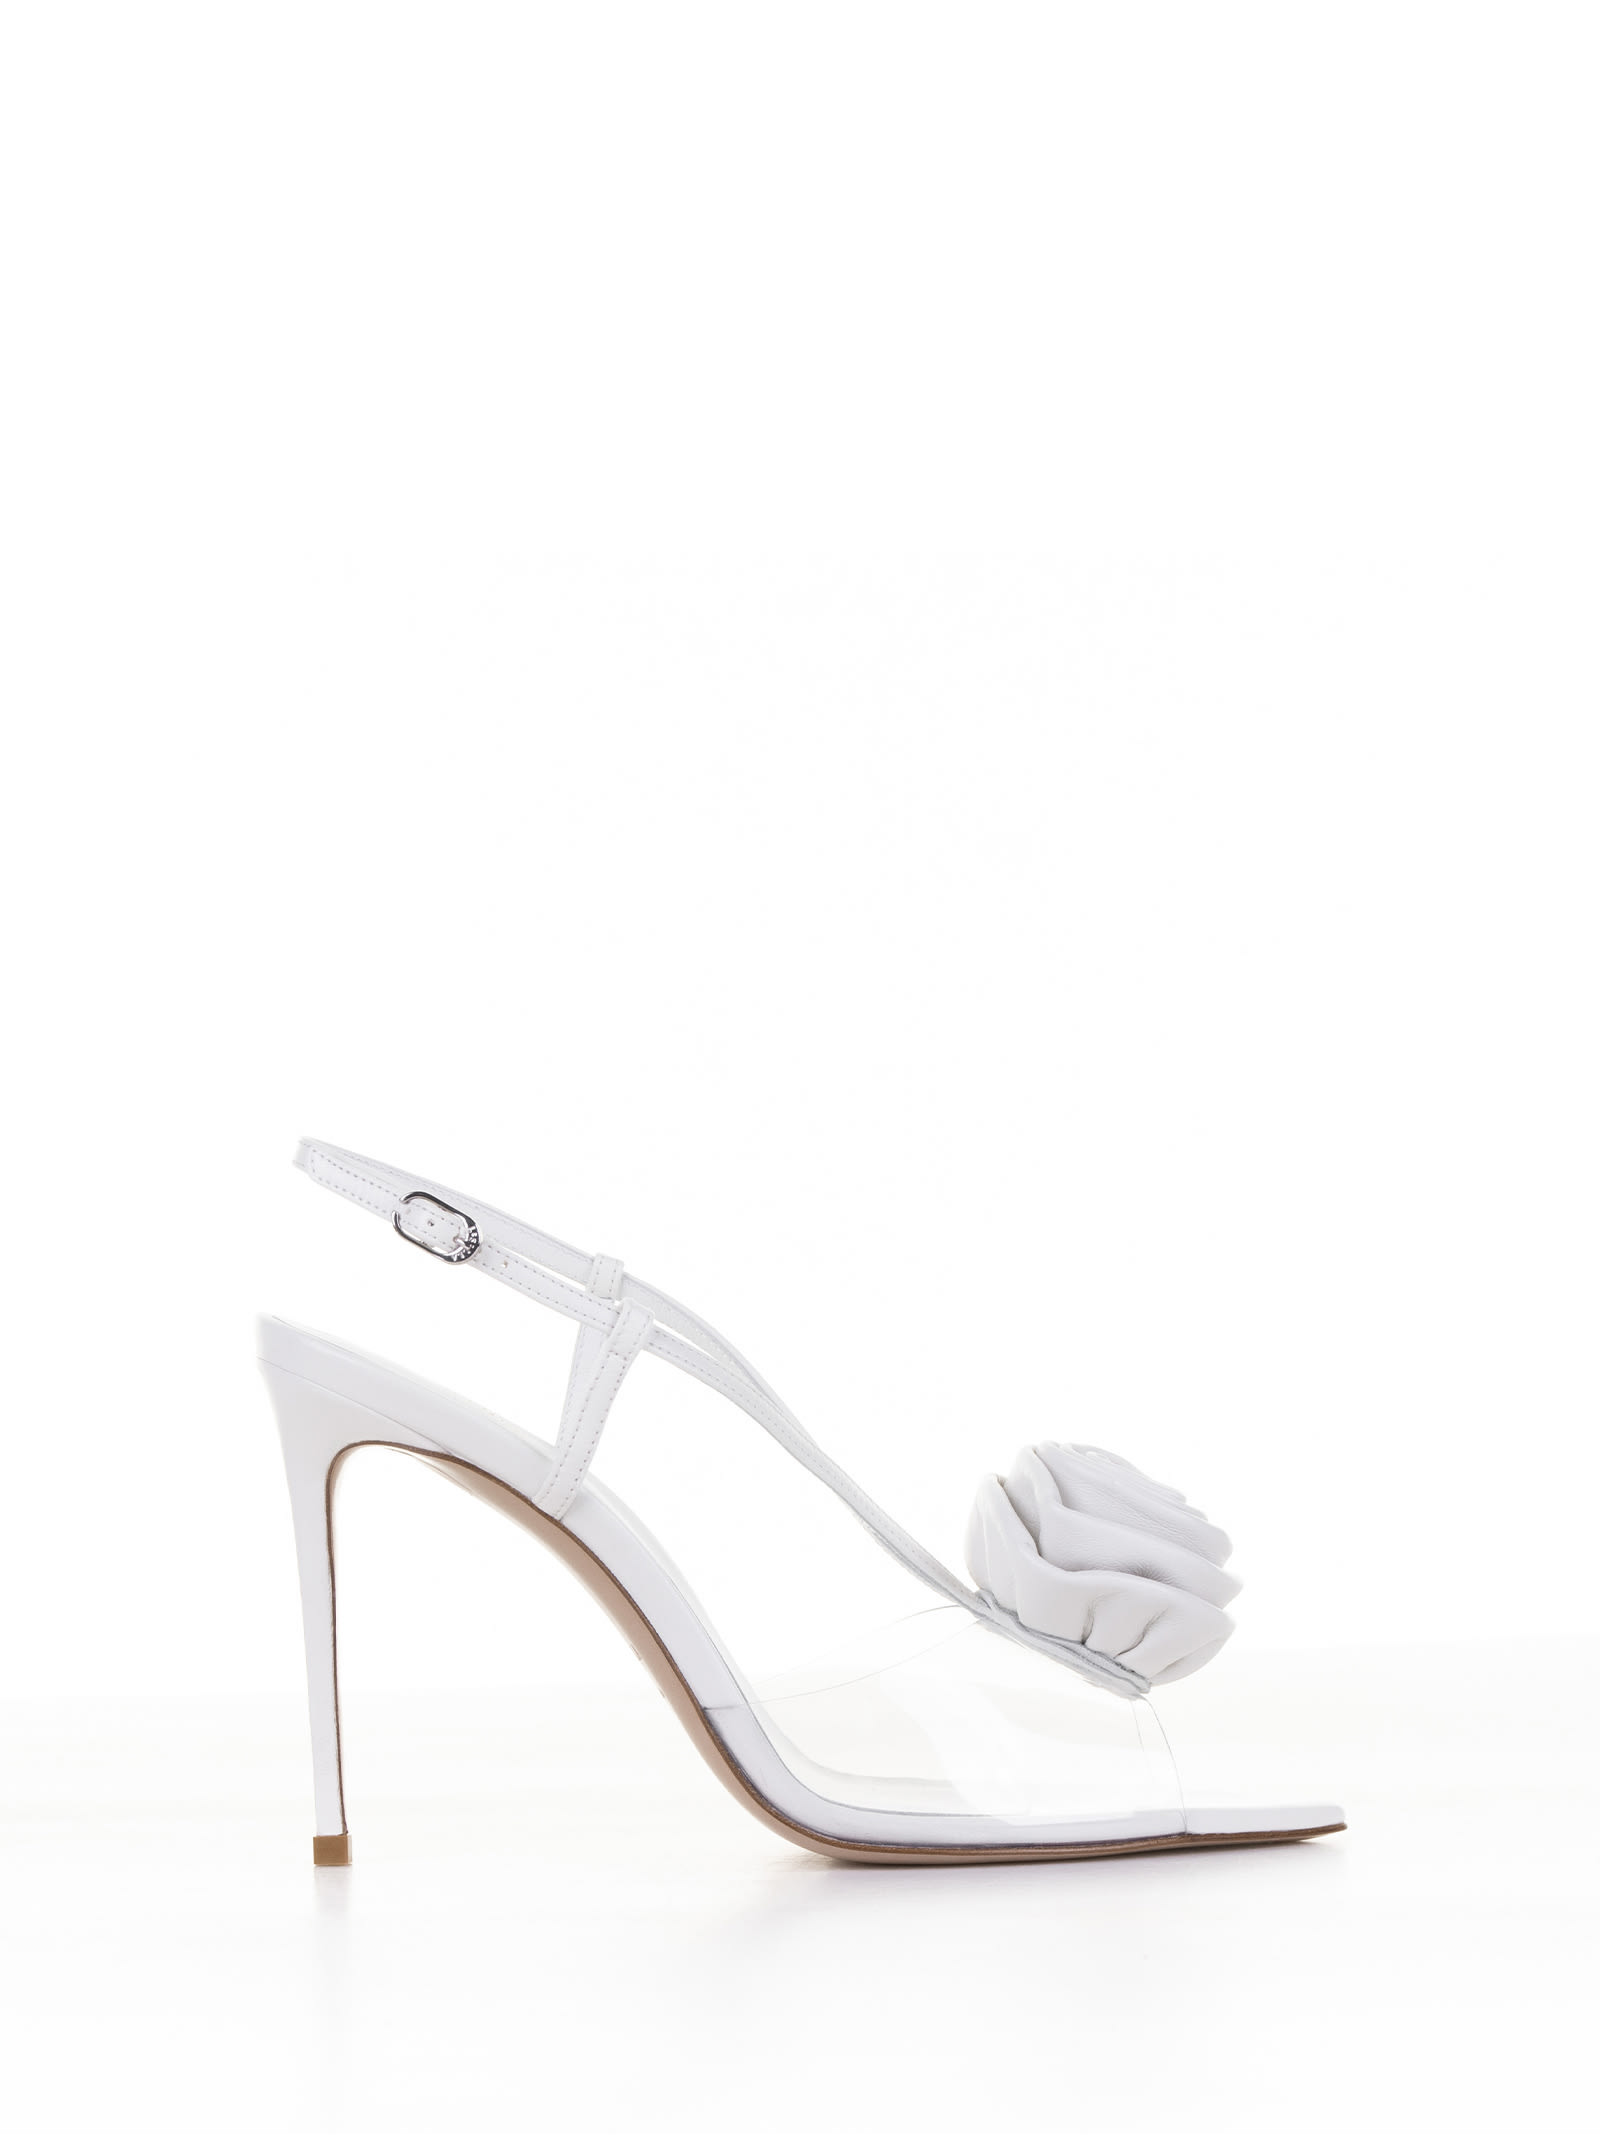 Shop Le Silla Slingback Décolleté In Nappa With Flower In Bianco